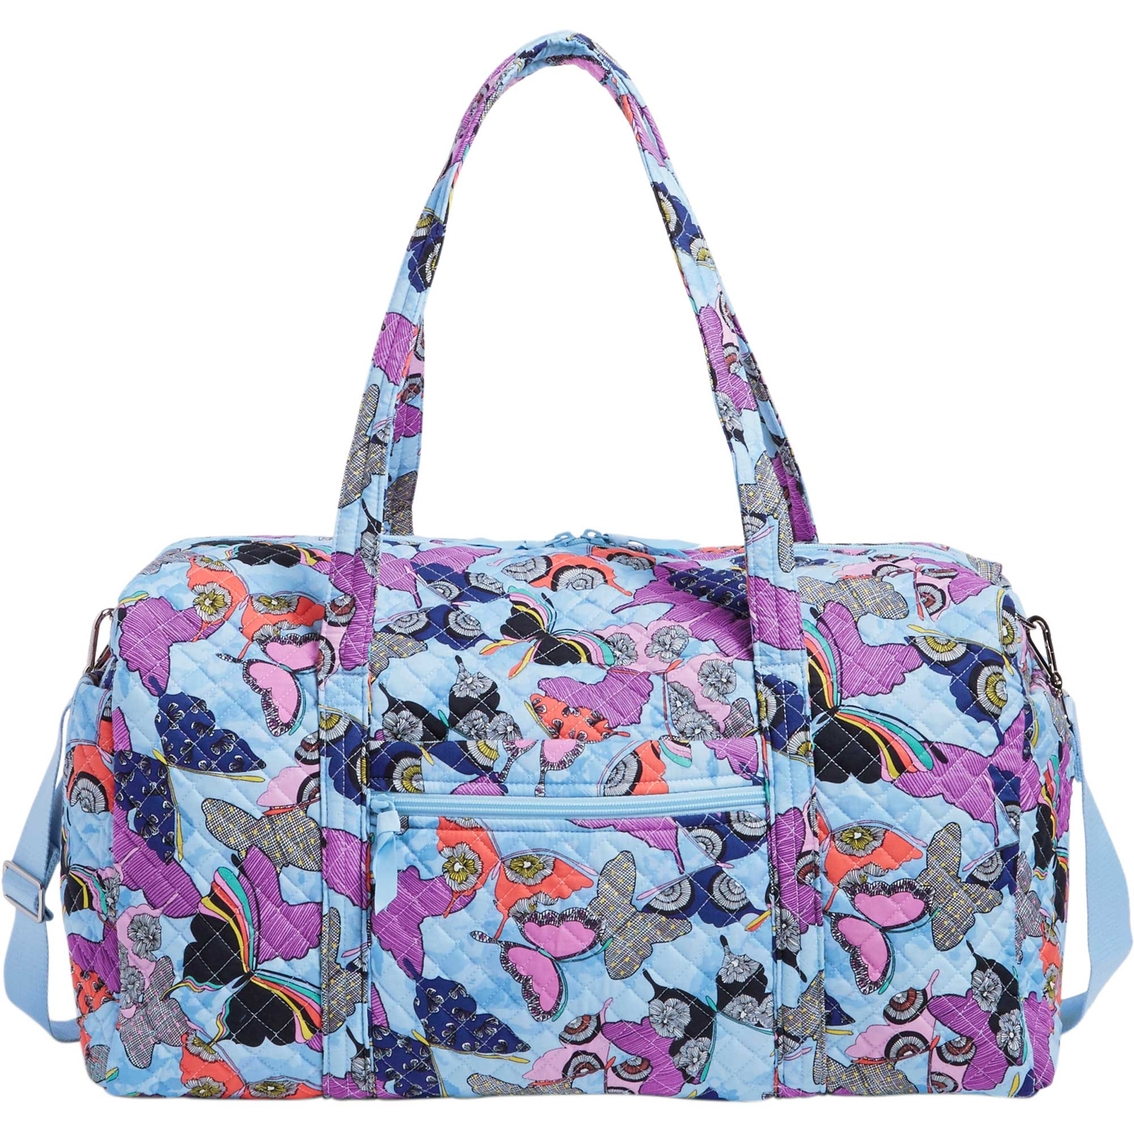 Vera Bradley Signature Cotton Large Travel Duffel Bag, Butterfly By